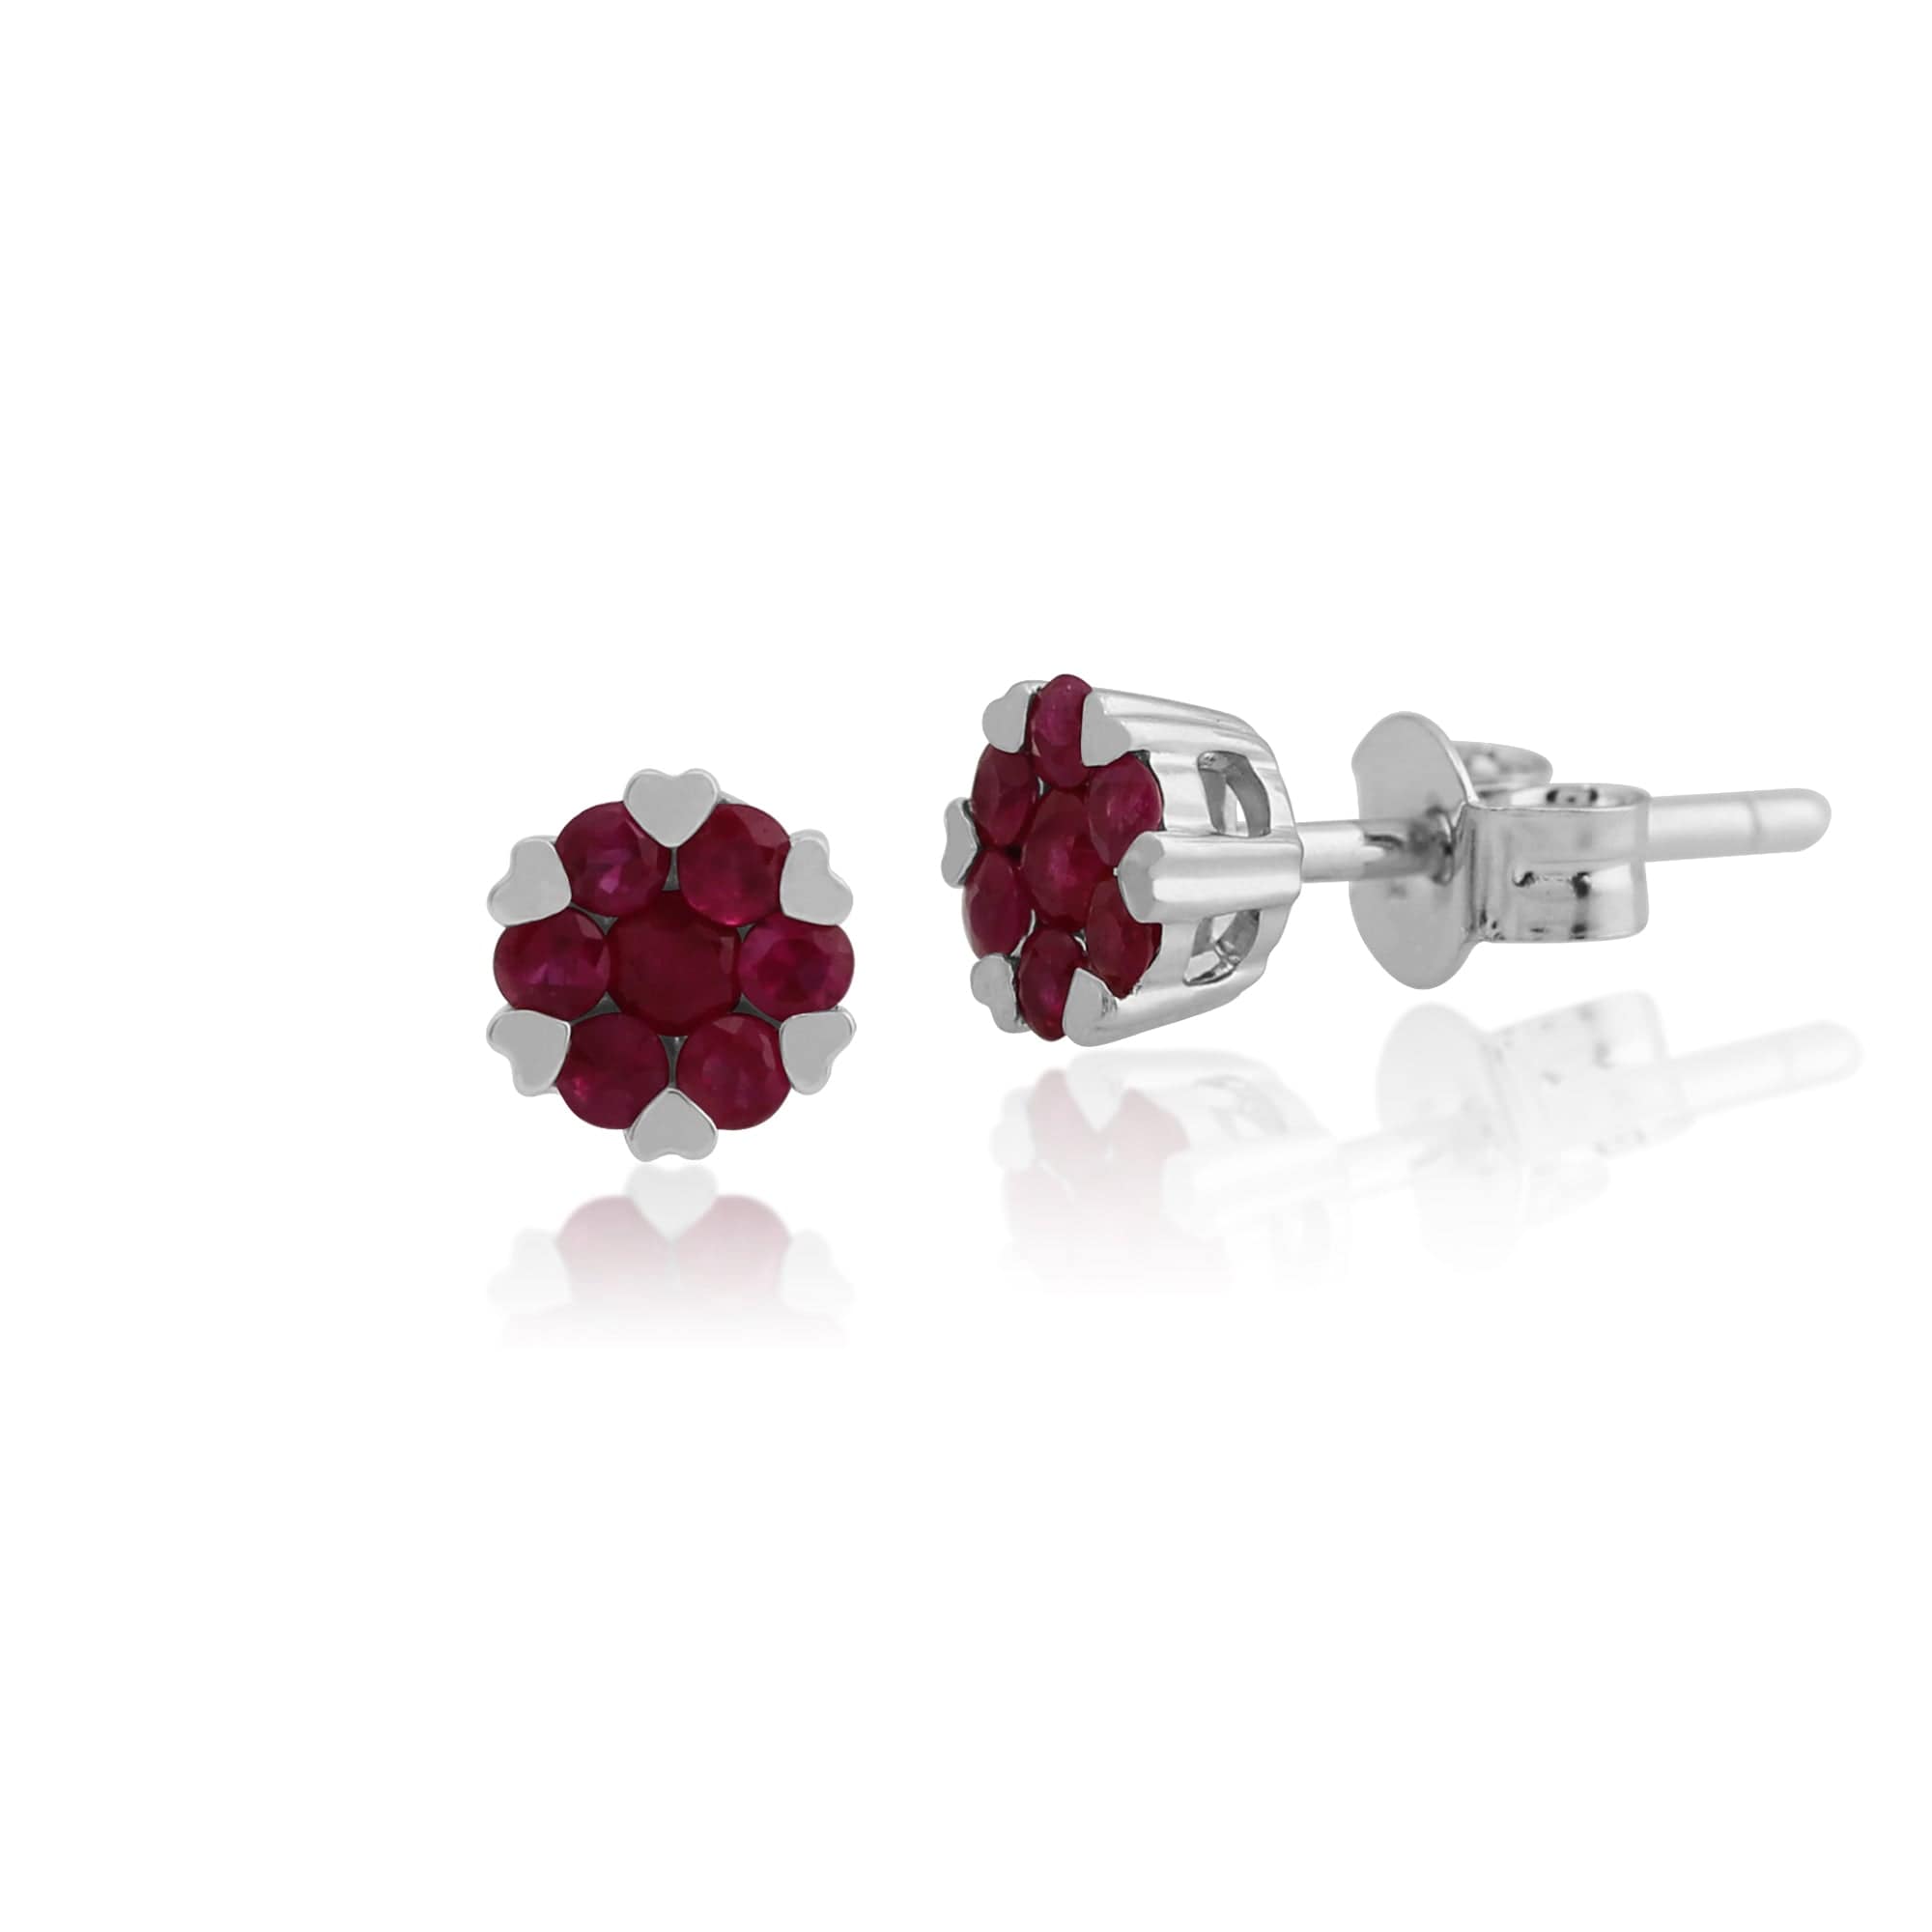 Gemondo 9ct White Gold 0.34ct Ruby Floral Cluster Stud Earrings Image